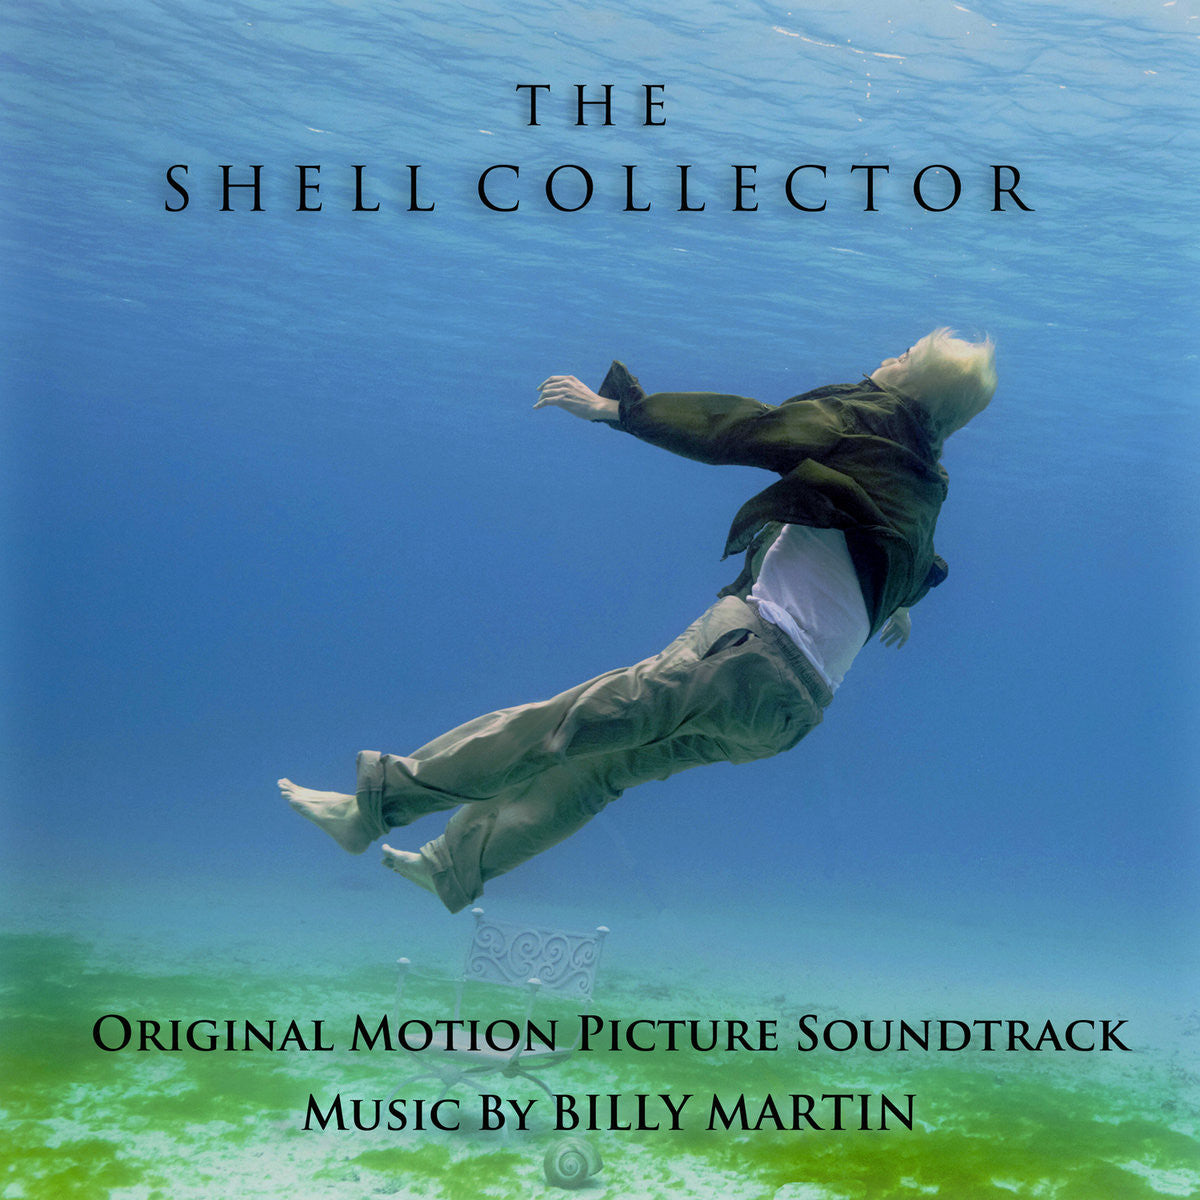 The Shell Collector Digital